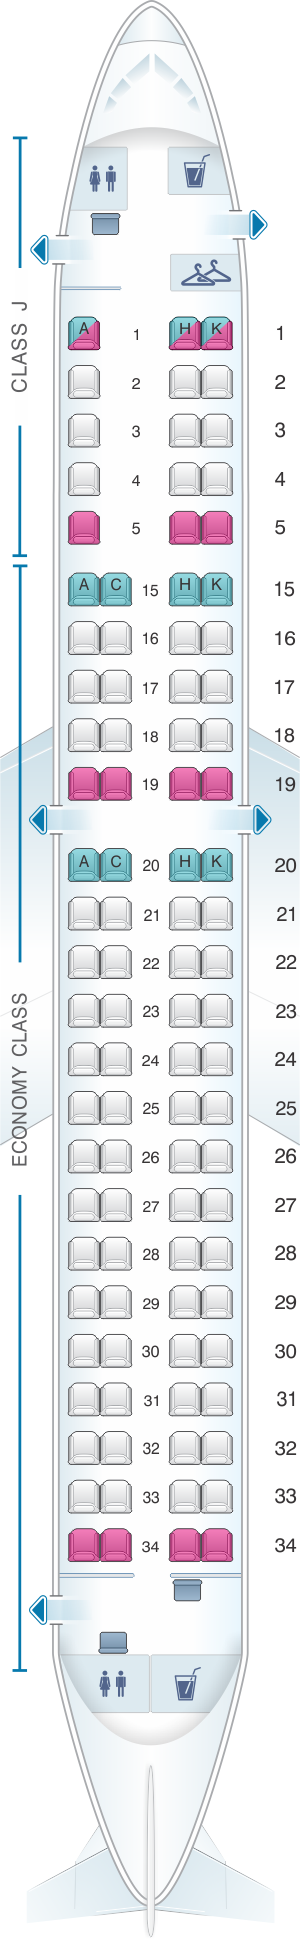 Seat map for Japan Airlines (JAL) Embraer 190 M11